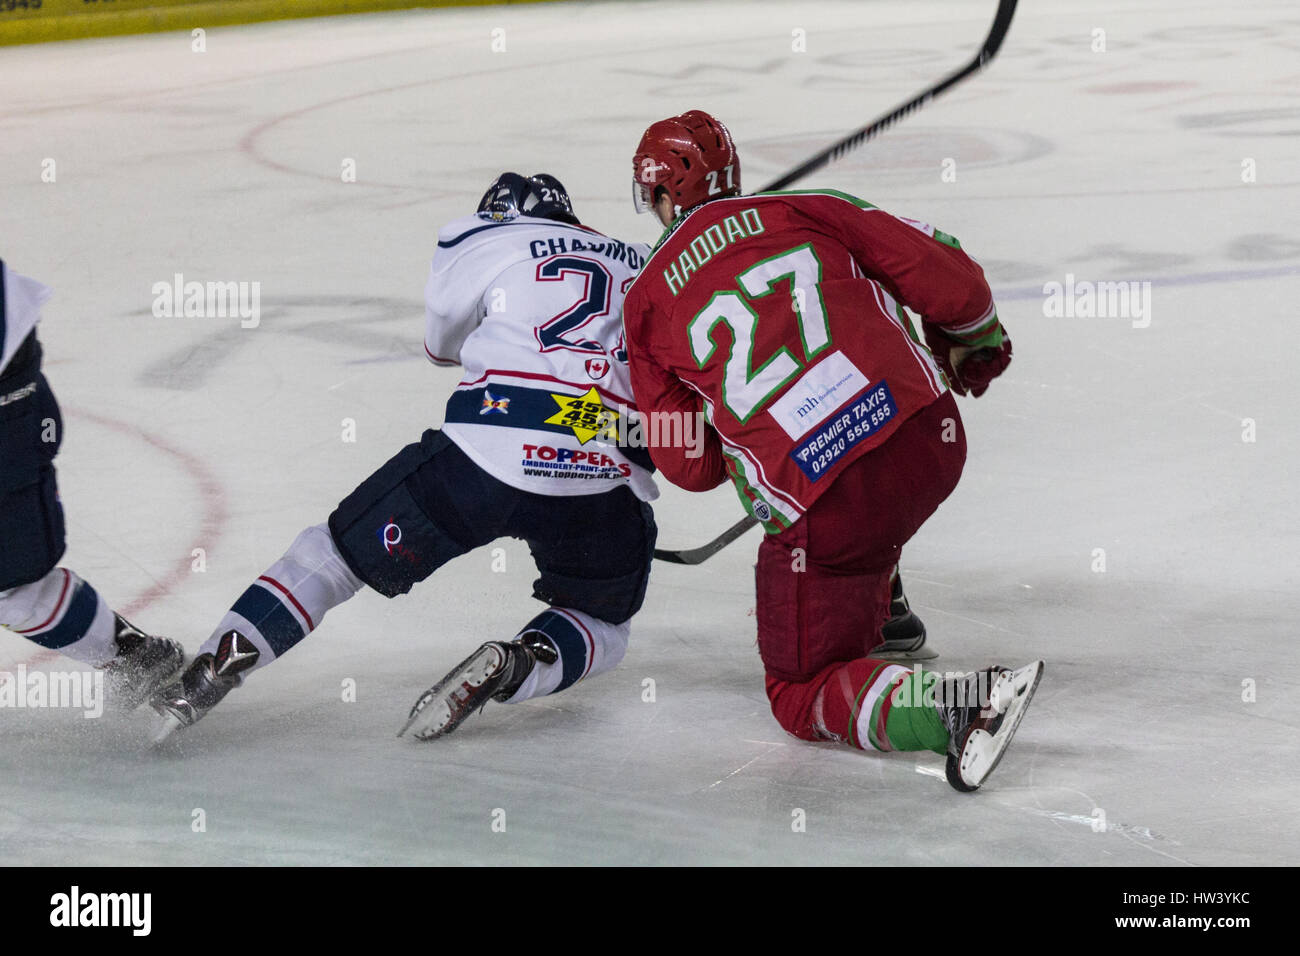 CARDIFF, UNITED KINGDOM. Cardiff Devils Ice Hockey team playing a home game in the Cardiff Ice Arena. Stock Photo